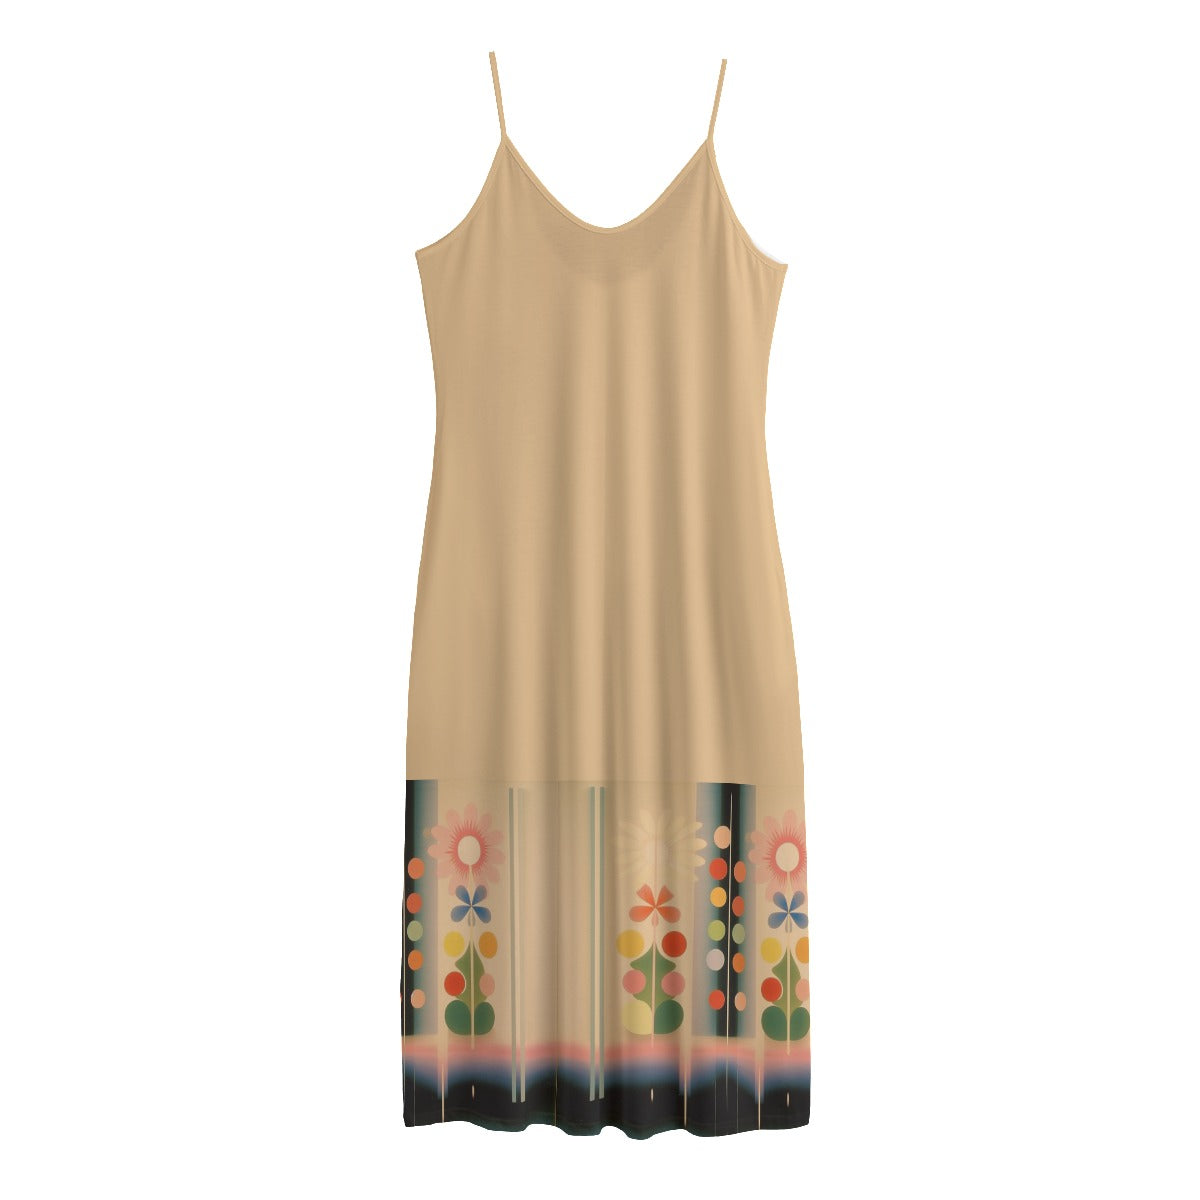 Women‘s Maxi Dress with straps and pockets